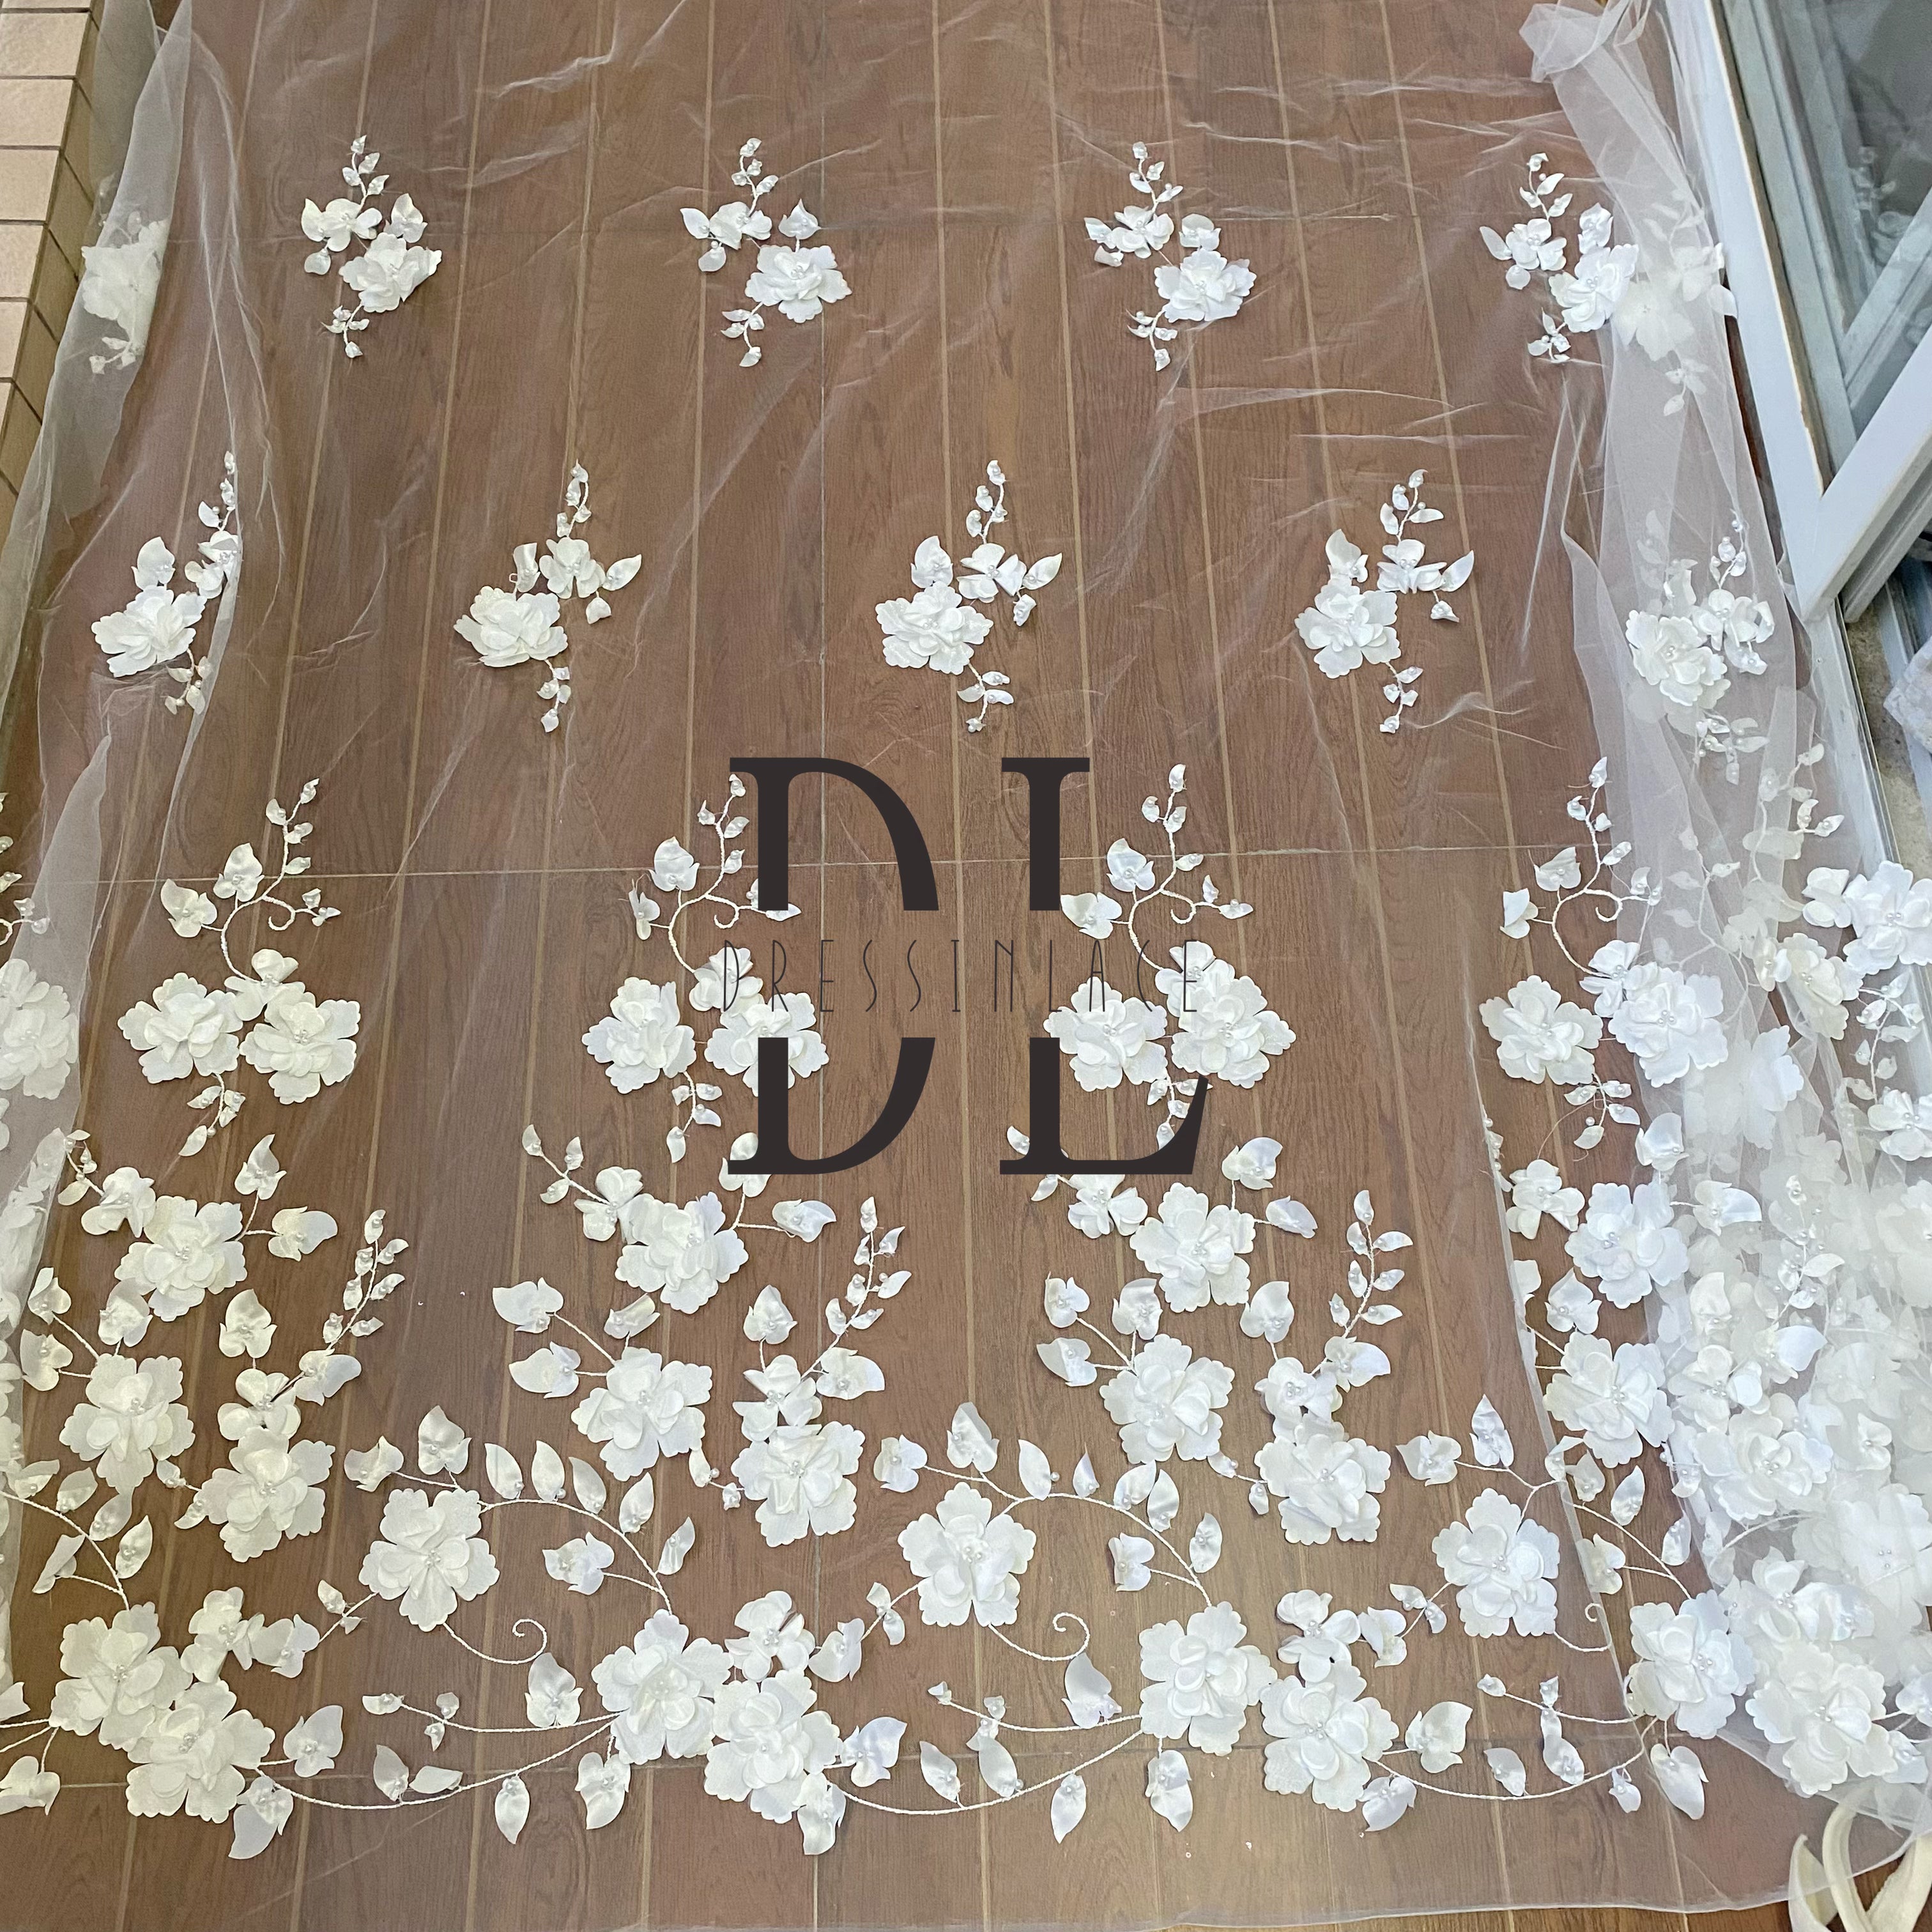 DL130013 High-quality soft 3D satin flowers lace fabric with pearl beads for wedding dresses